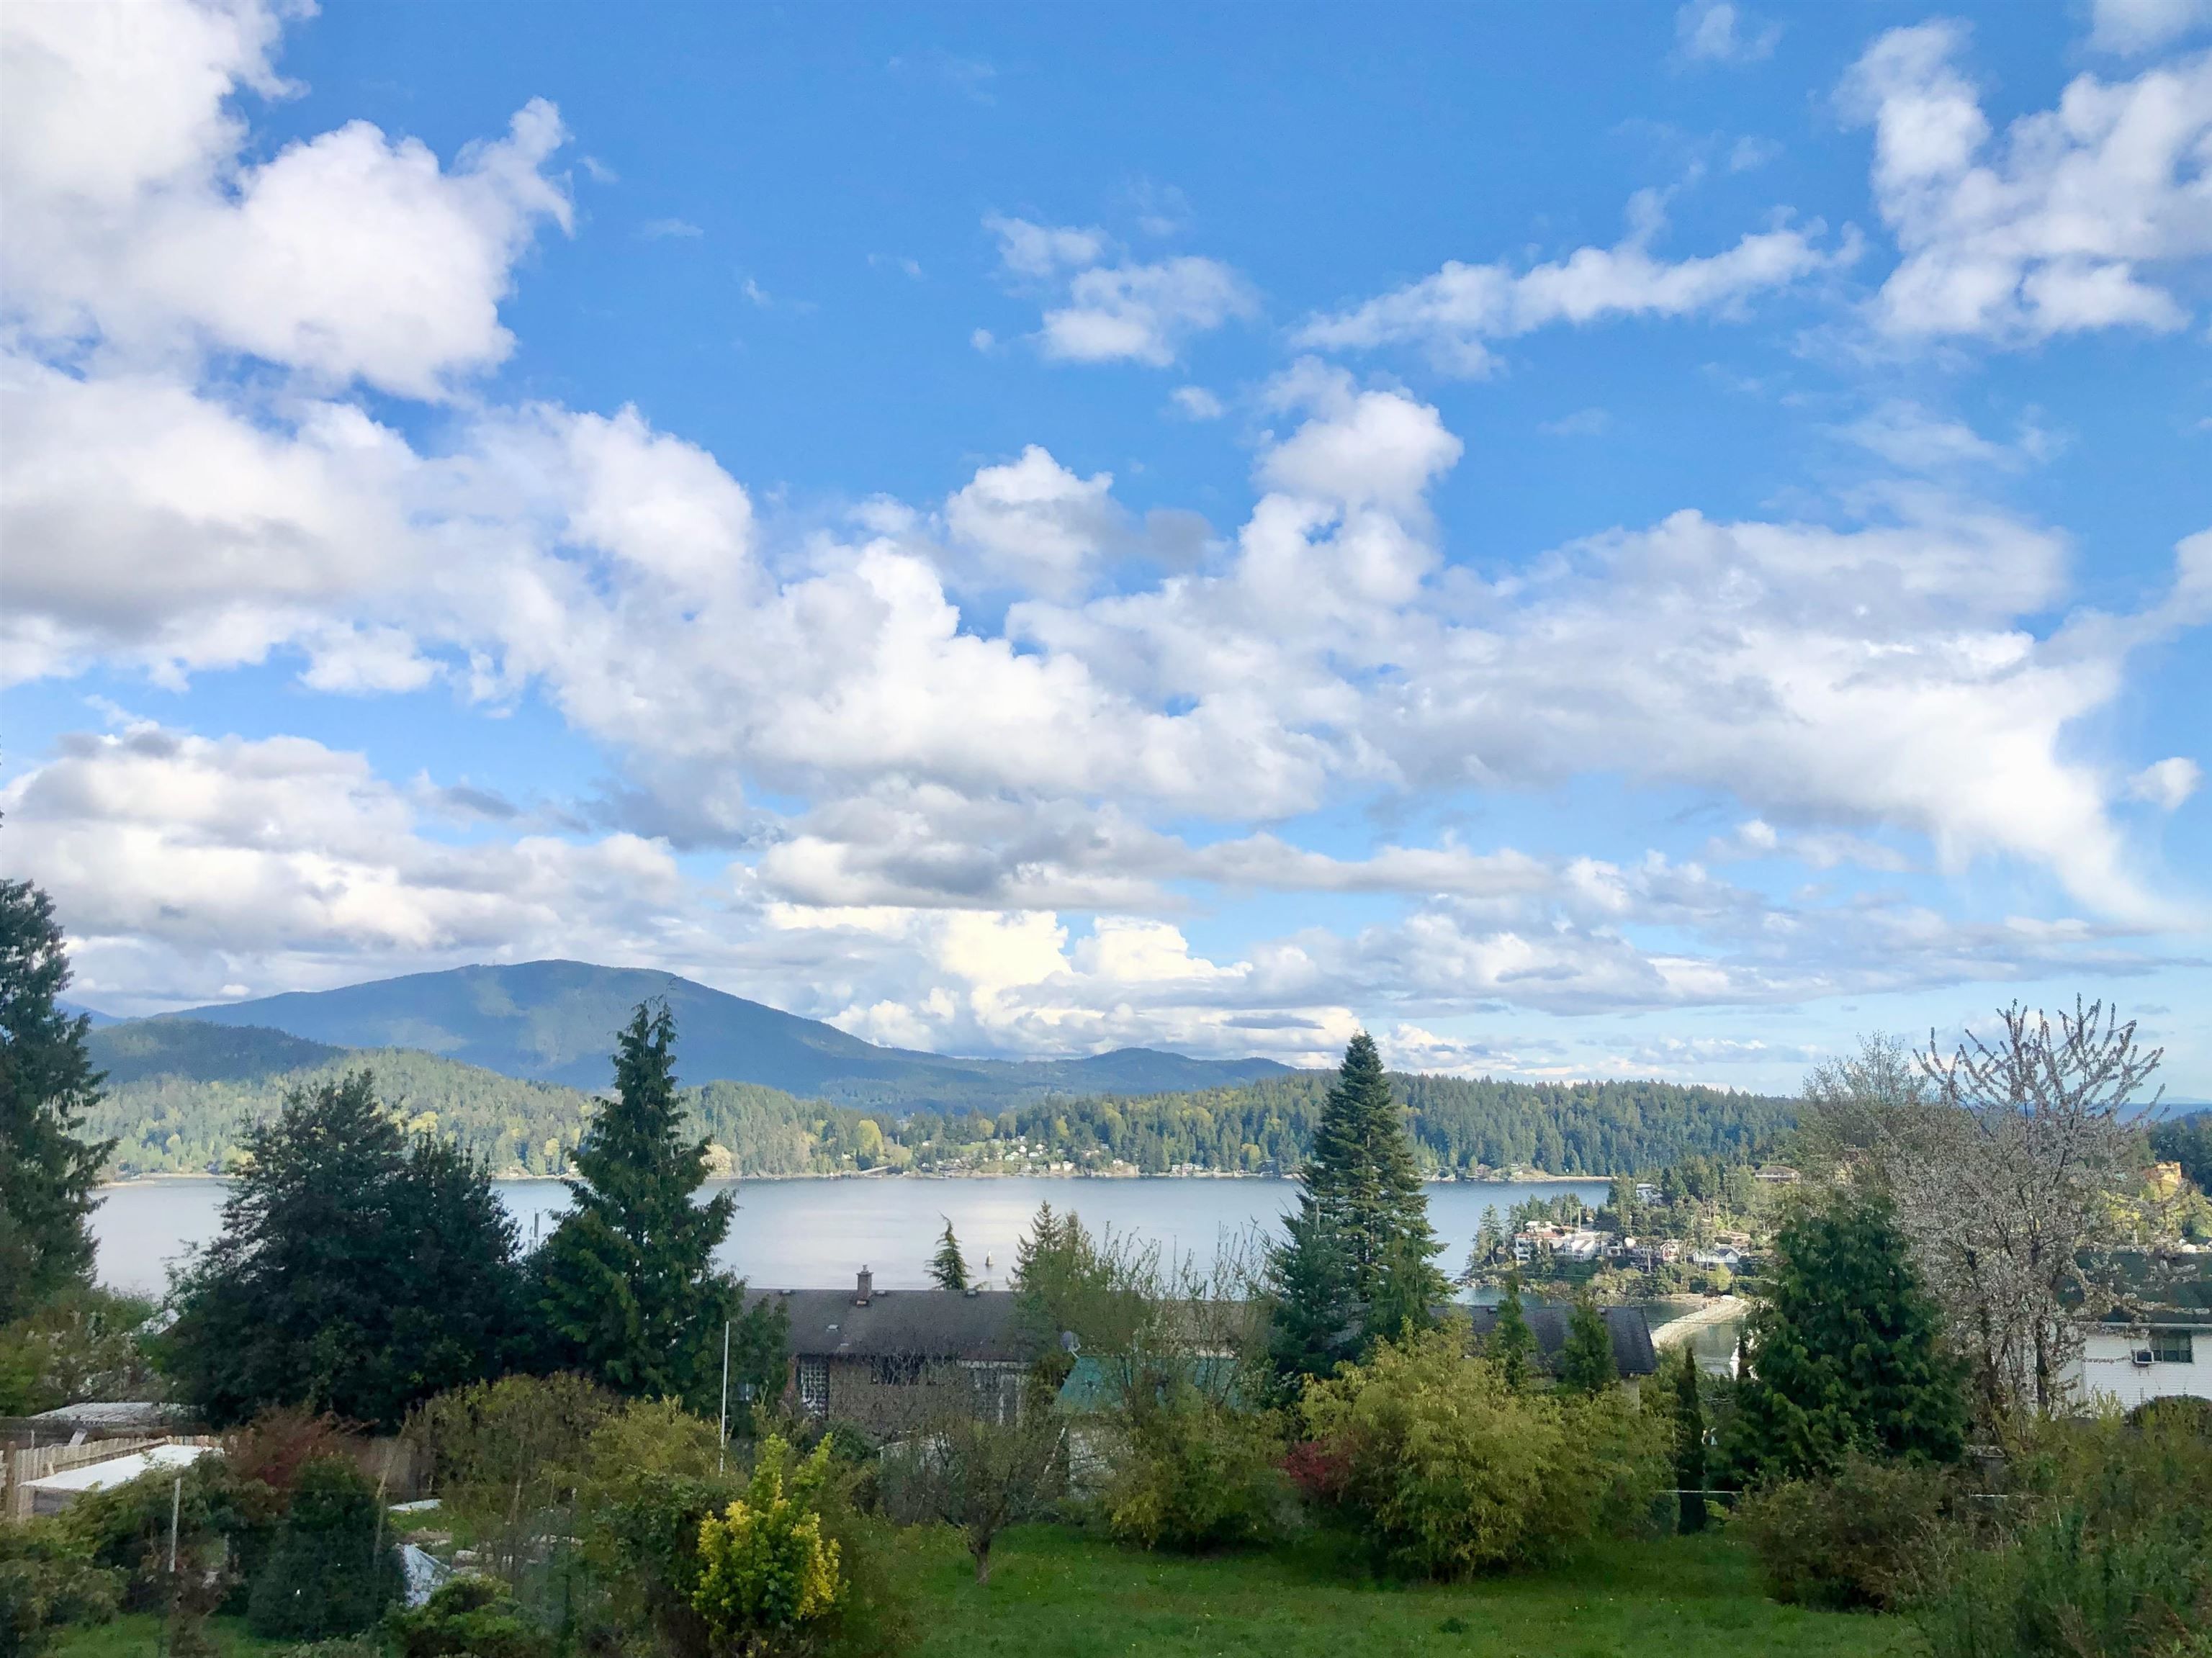 New property listed in Gibsons & Area, Sunshine Coast